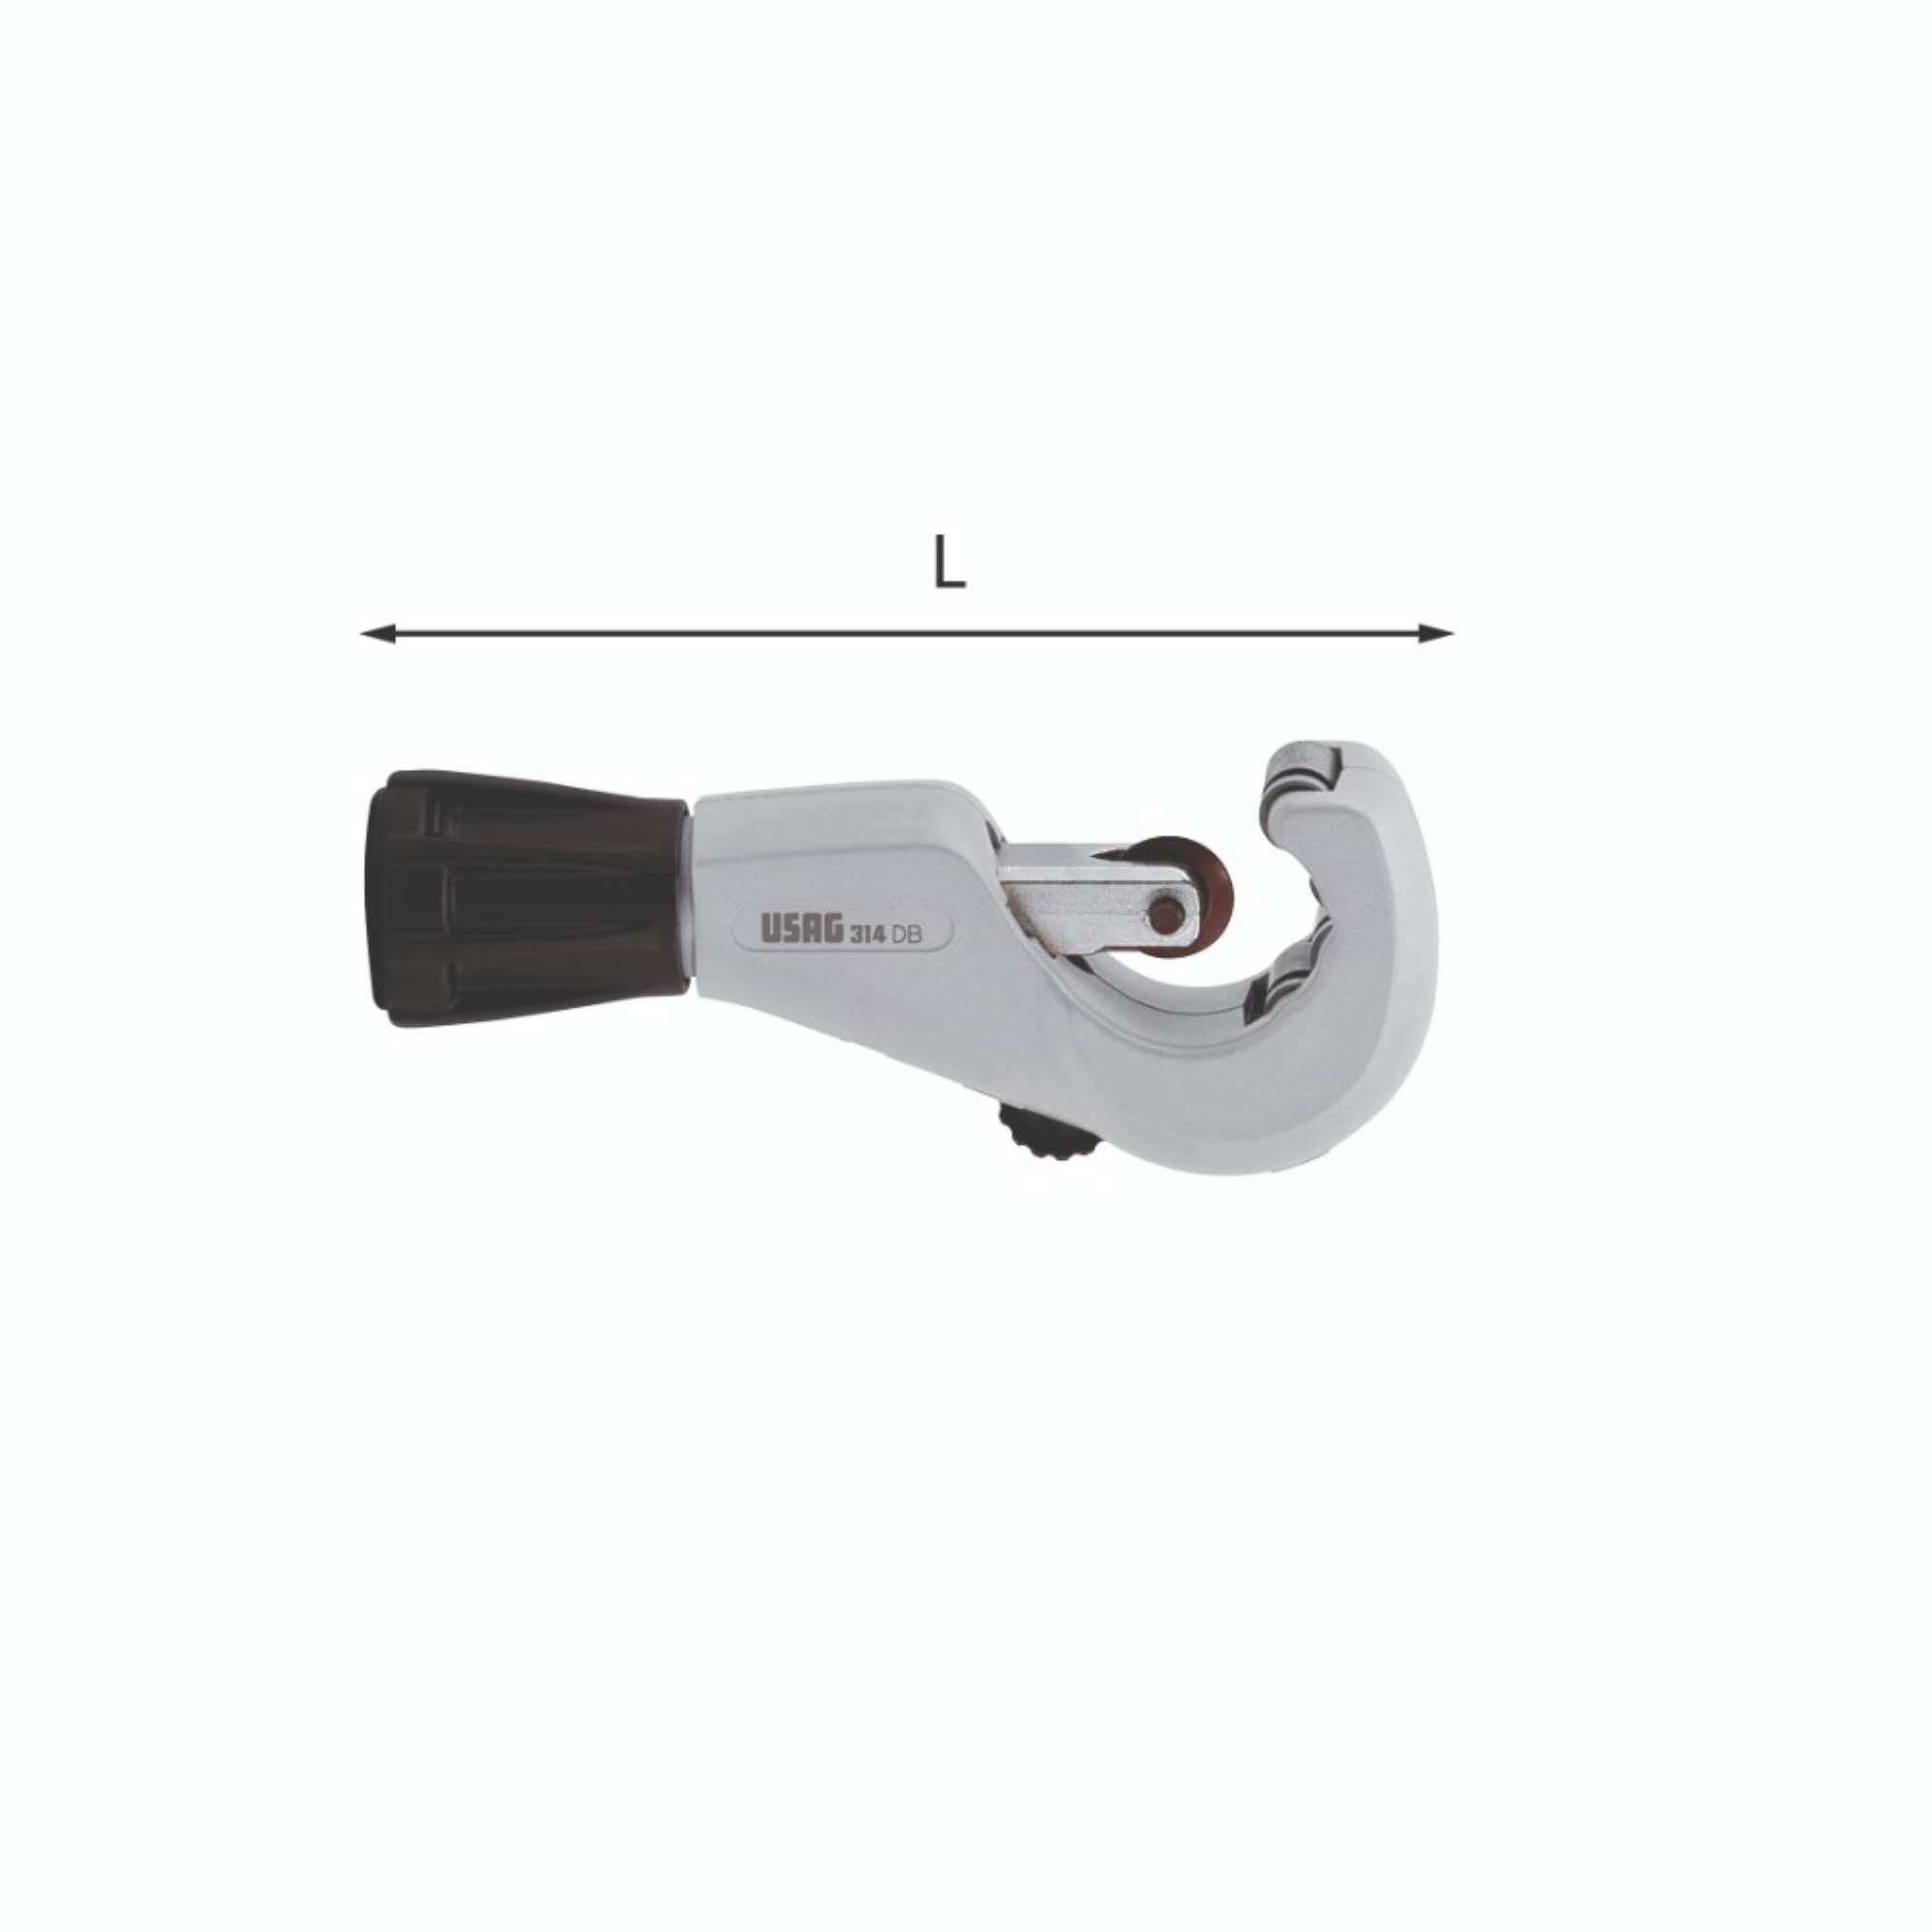 Stainless Steel Pipe Cutter - Usag 314 DB U03140034